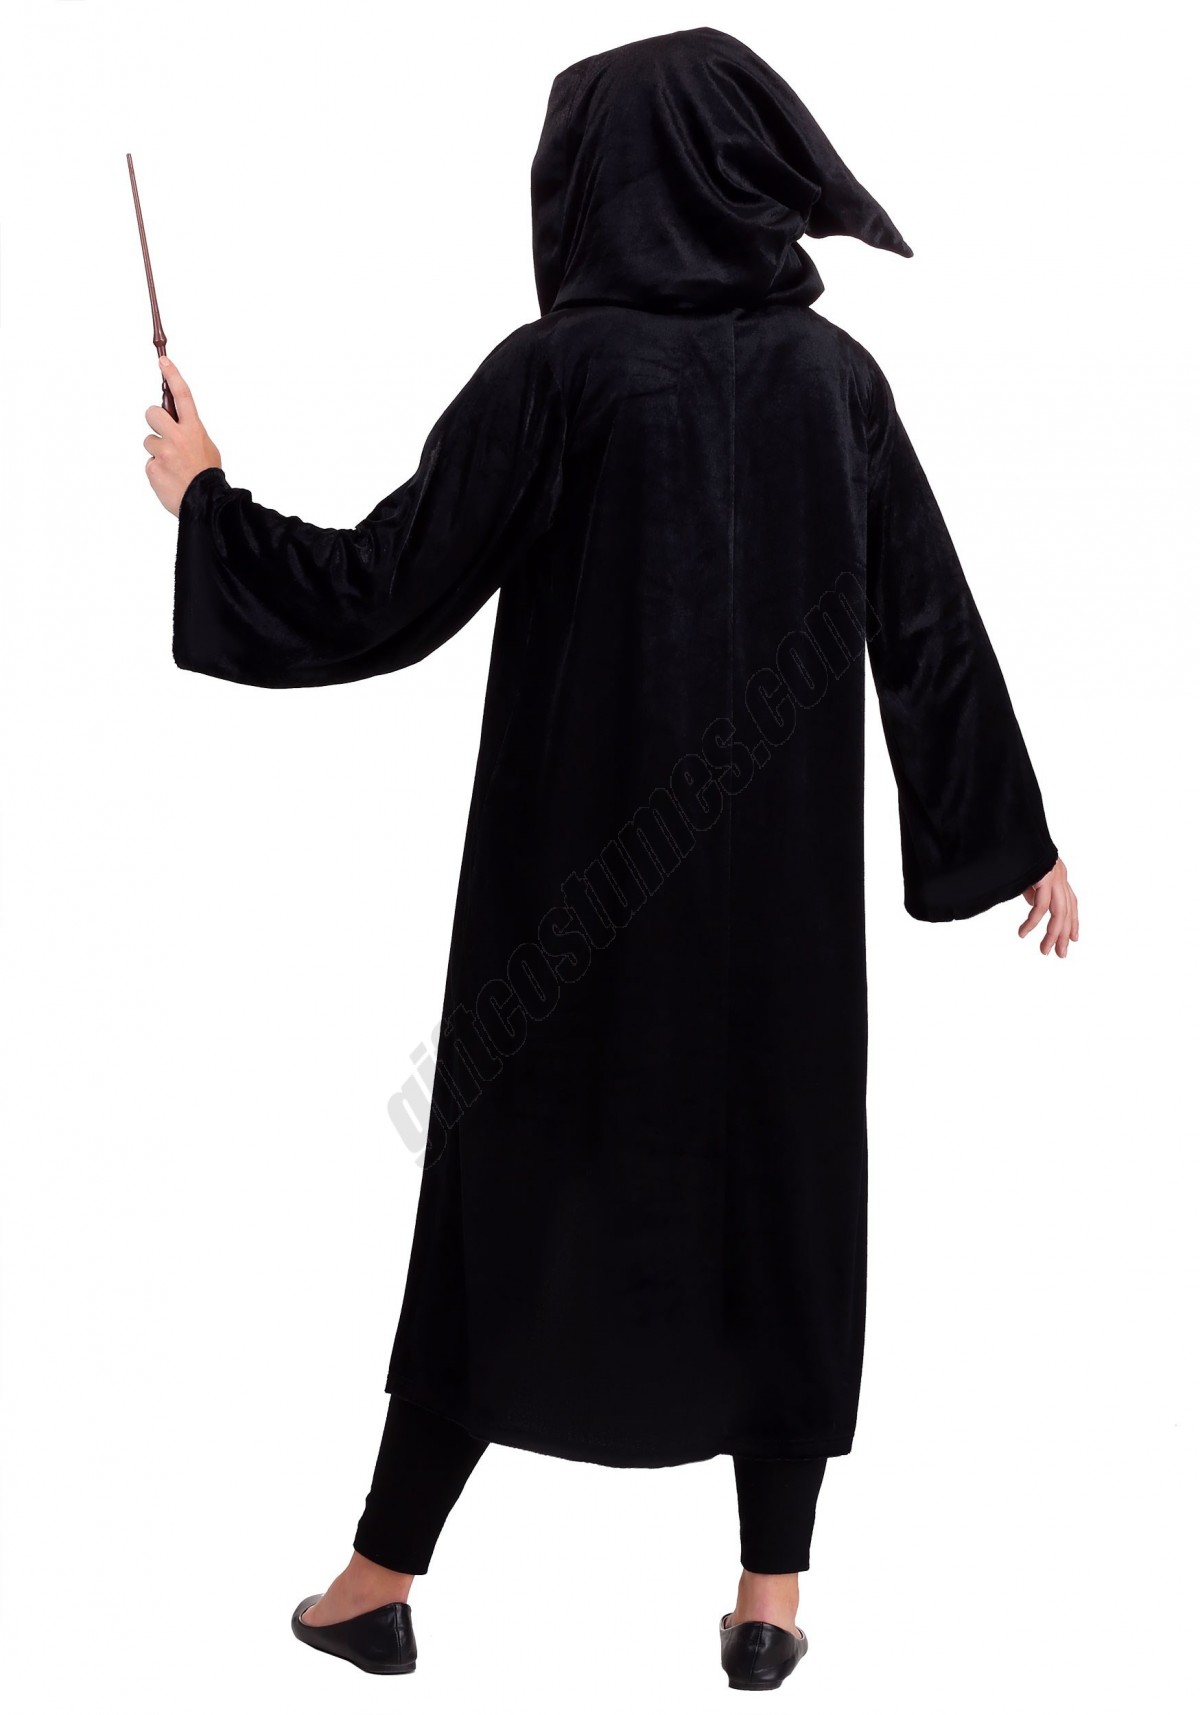 Deluxe Harry Potter Adult Plus Size Ravenclaw Robe Costume Promotions - -5